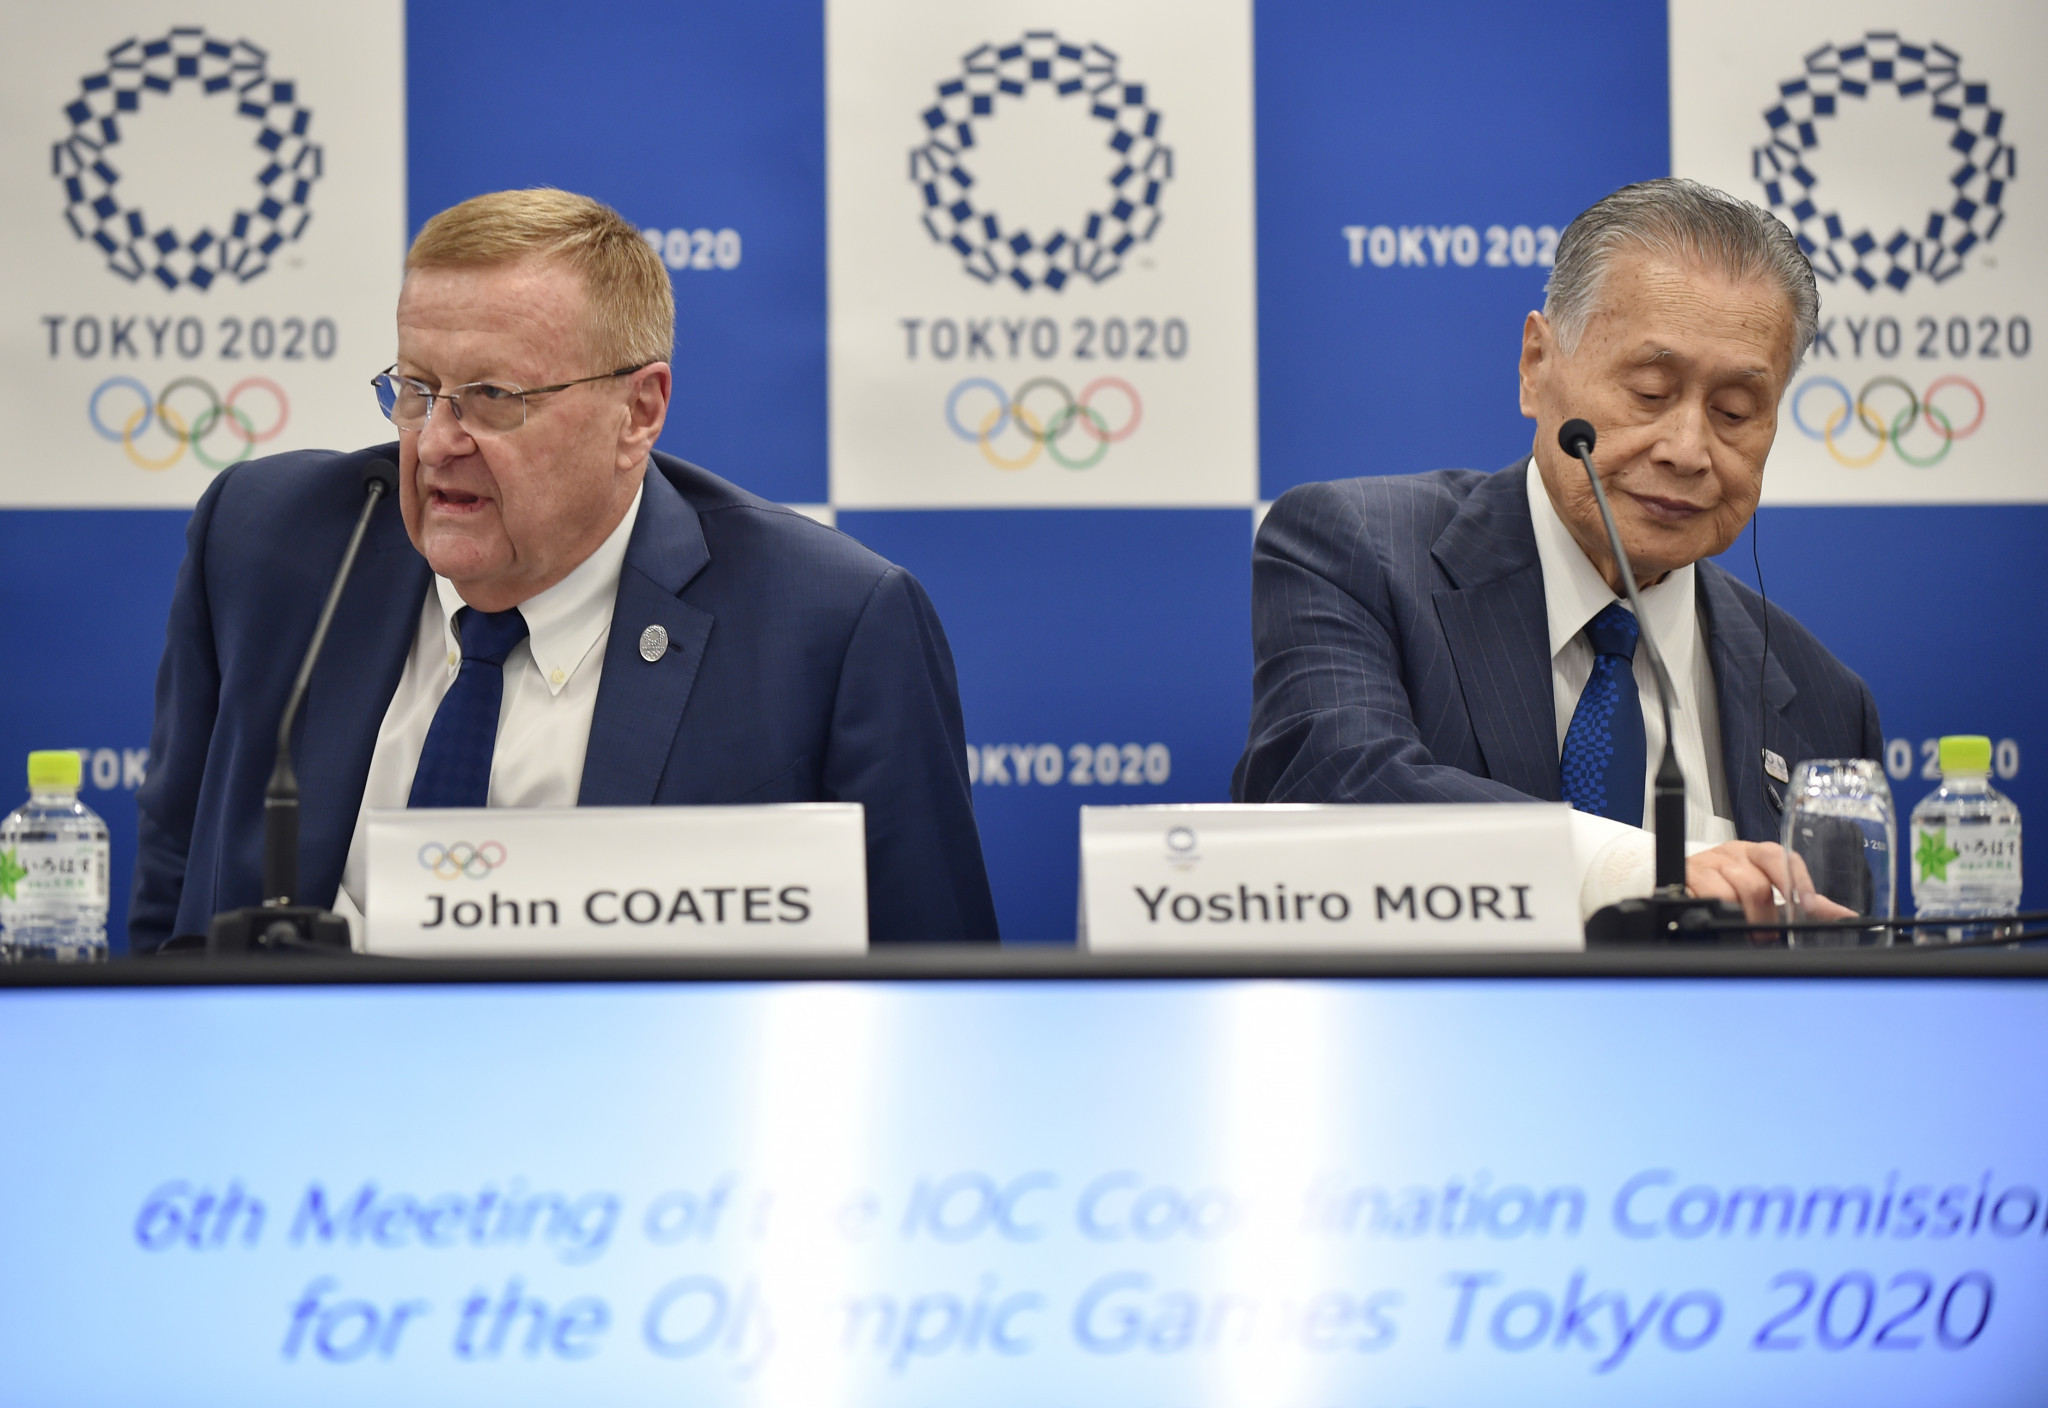 IOC Coordination Commission chair John Coates has consistently spoken of the need for Tokyo 2020 to reduce costs, although it is still nearly double what was initially budgetted ©Getty Images